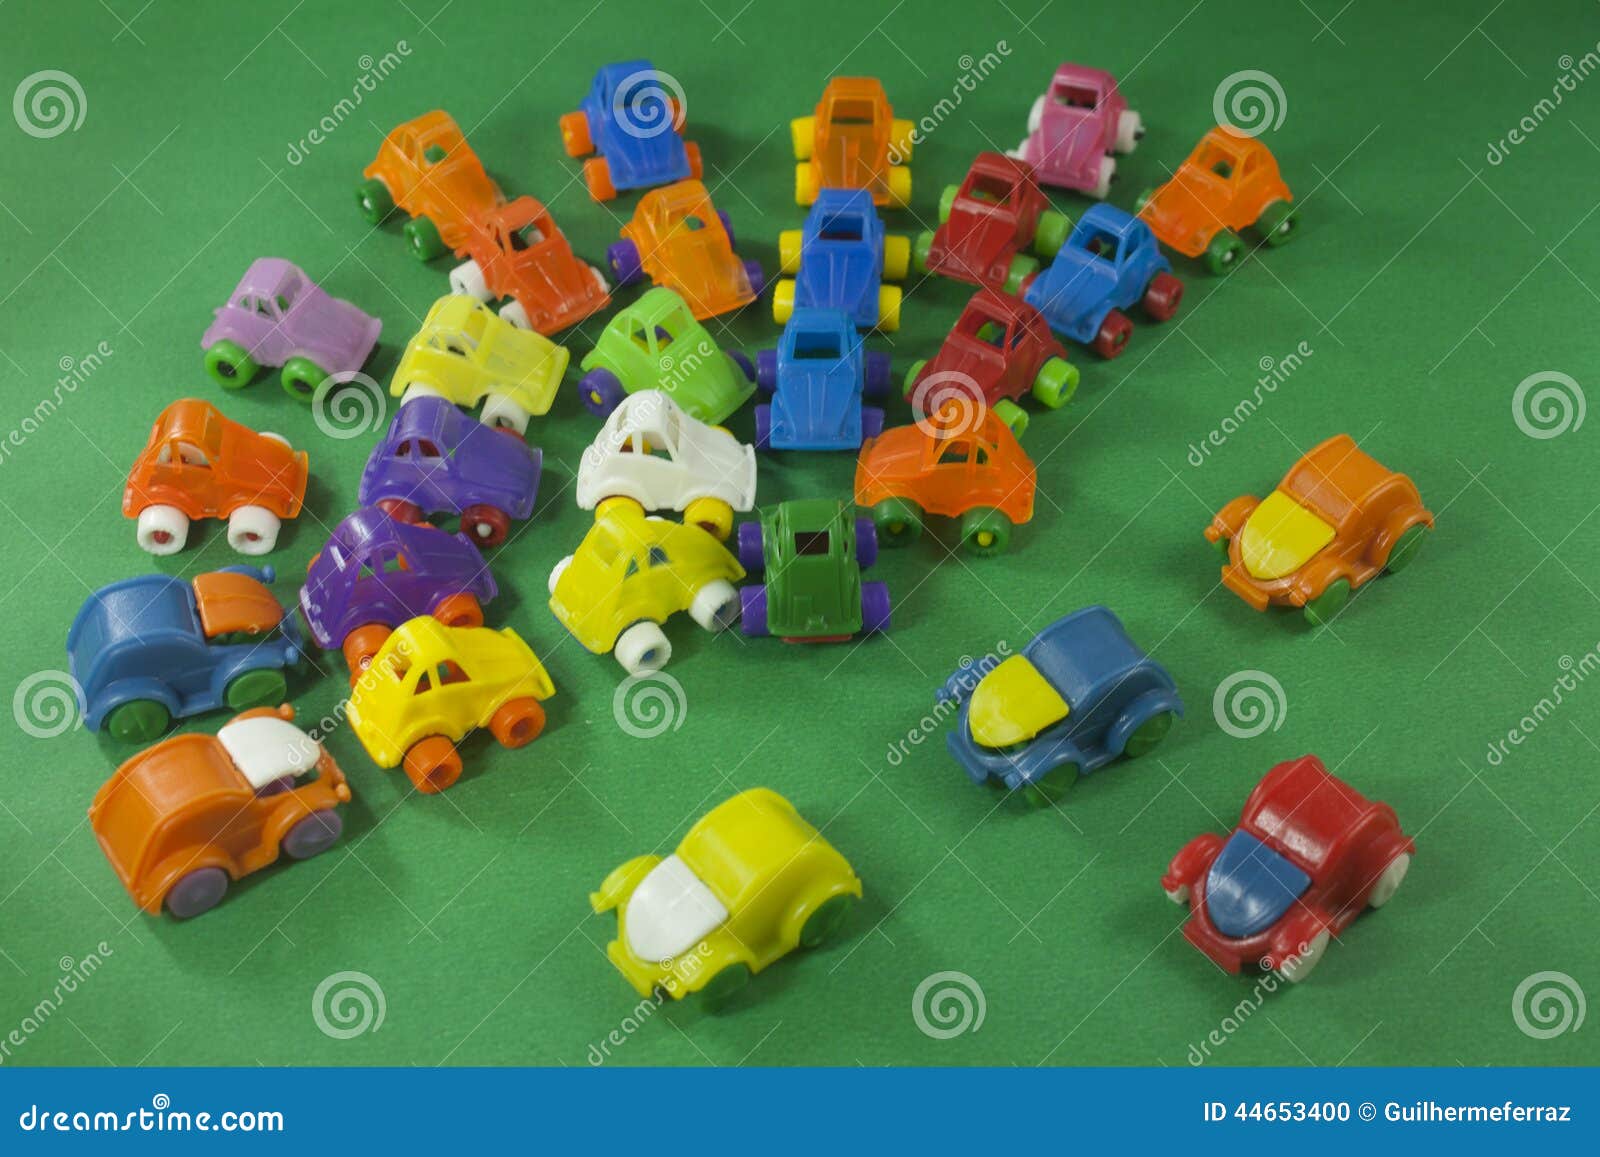 colorful plastic toys